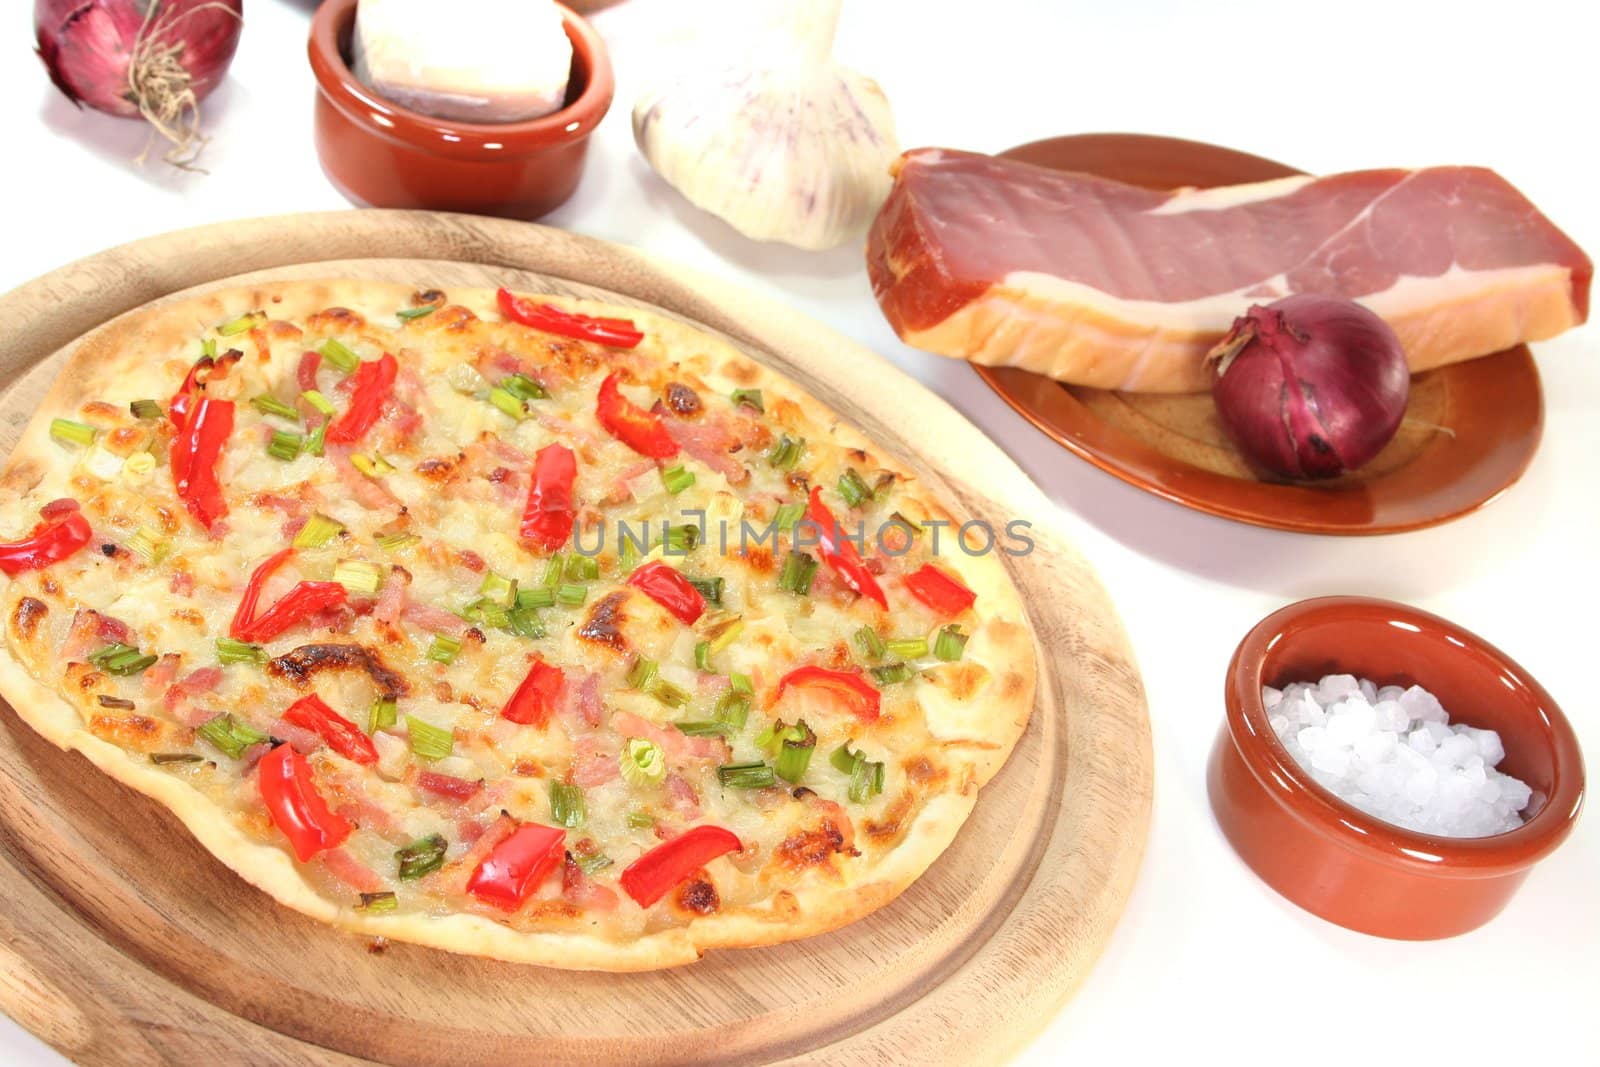 tarte flambee by discovery